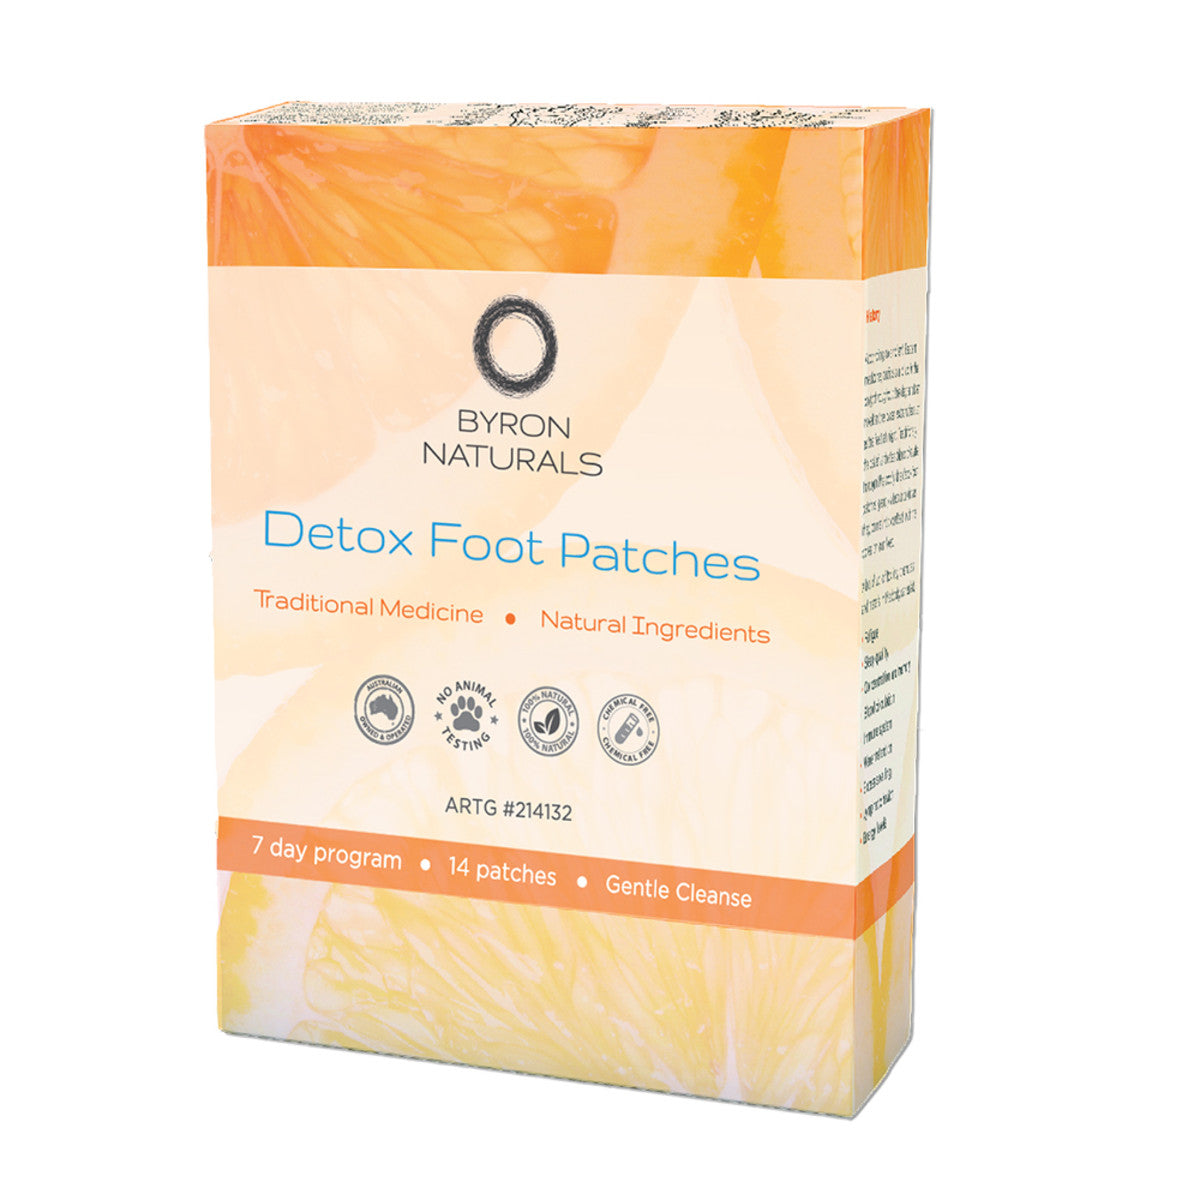 Byron Naturals Detox Foot Patches (7 Day Program) x 14 Patches (7 Pairs)